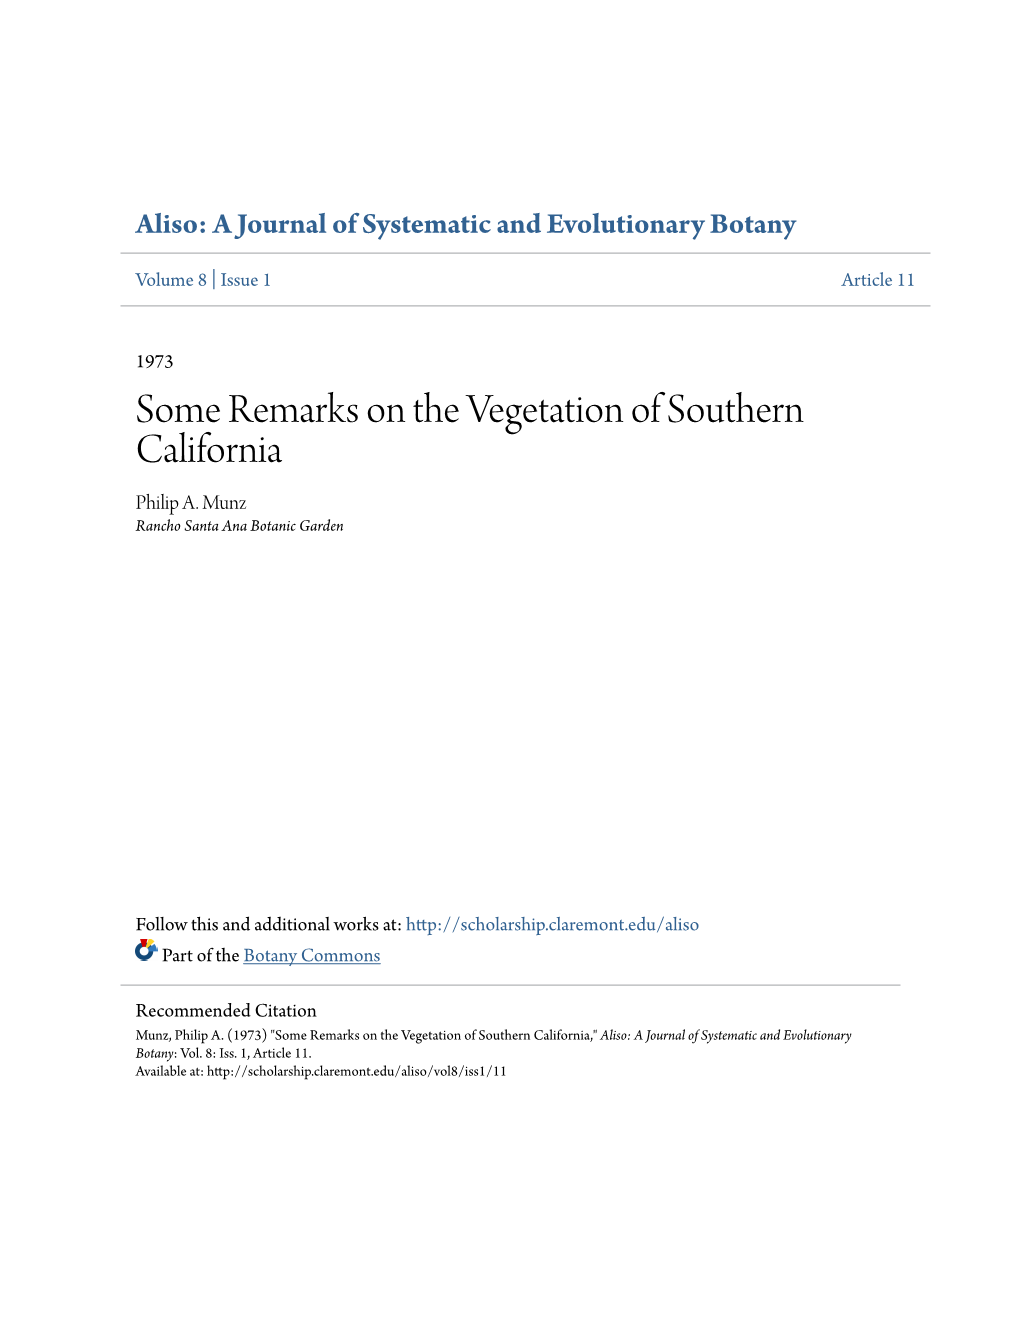 Some Remarks on the Vegetation of Southern California Philip A